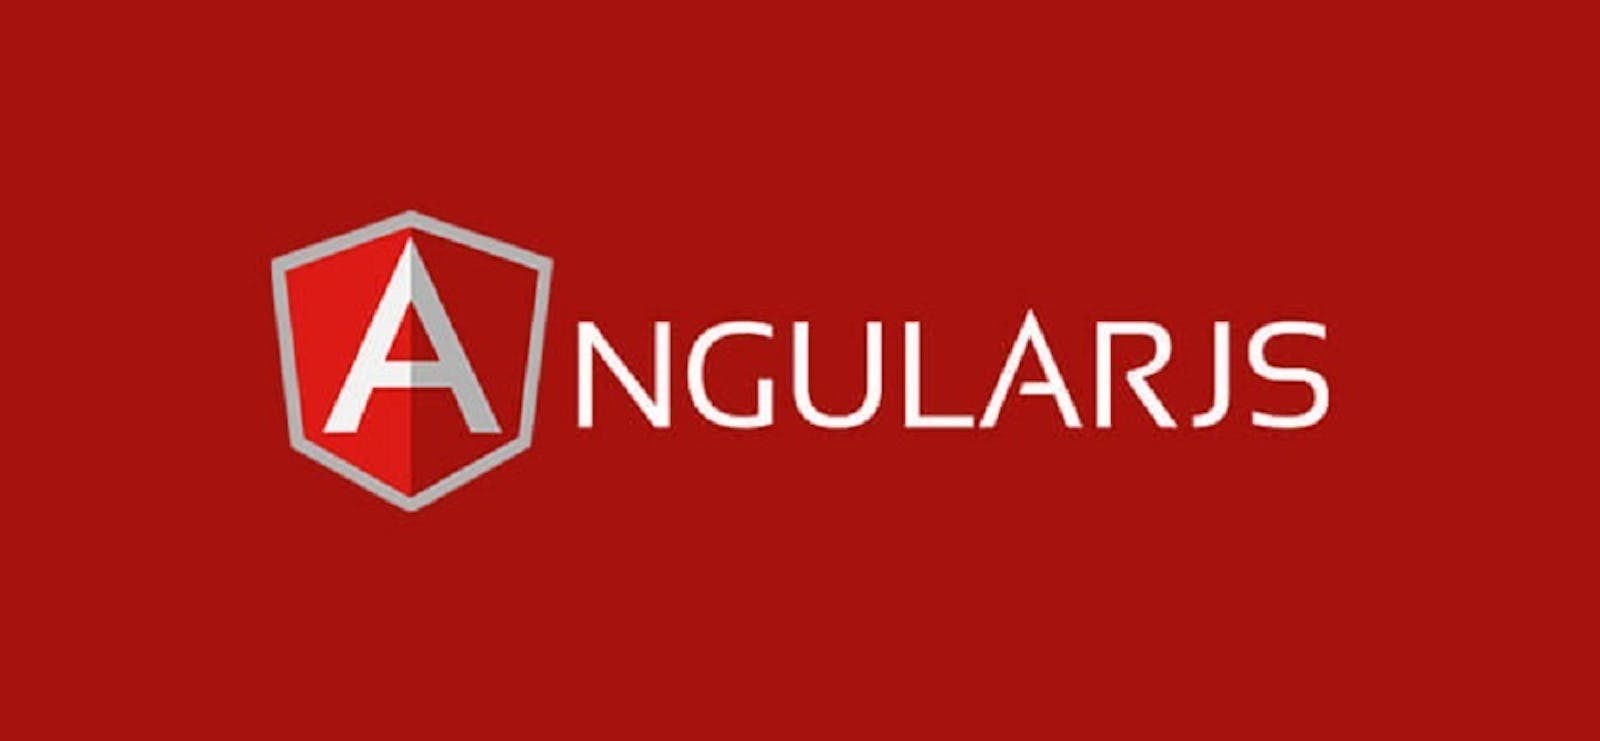 Know About The New Era Of Angular JS For Single-Page Application Development